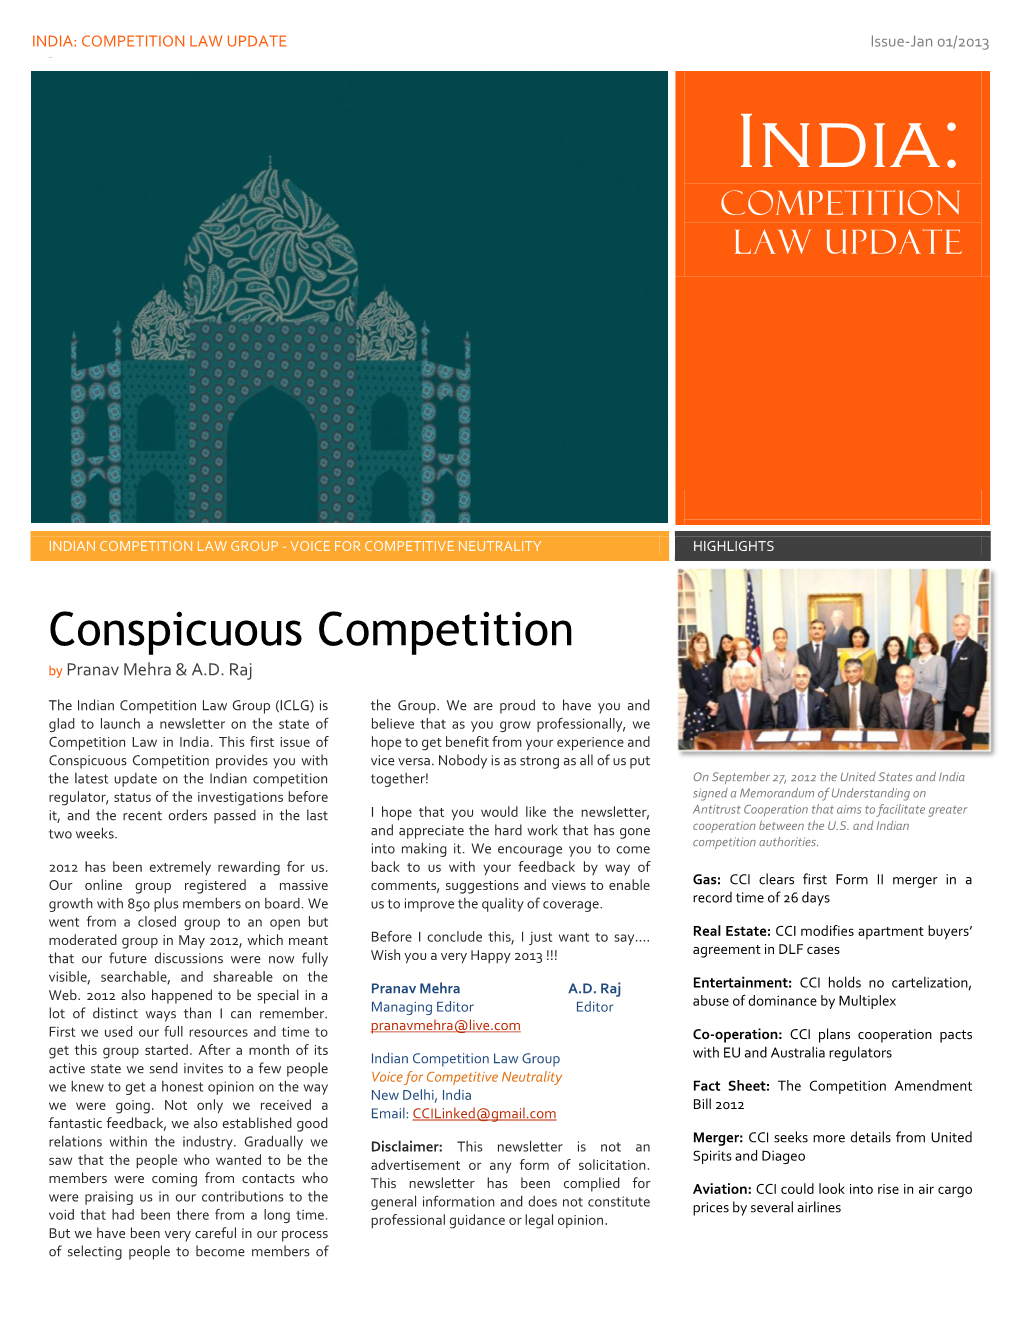 Conspicuous Competition by Pranav Mehra & A.D